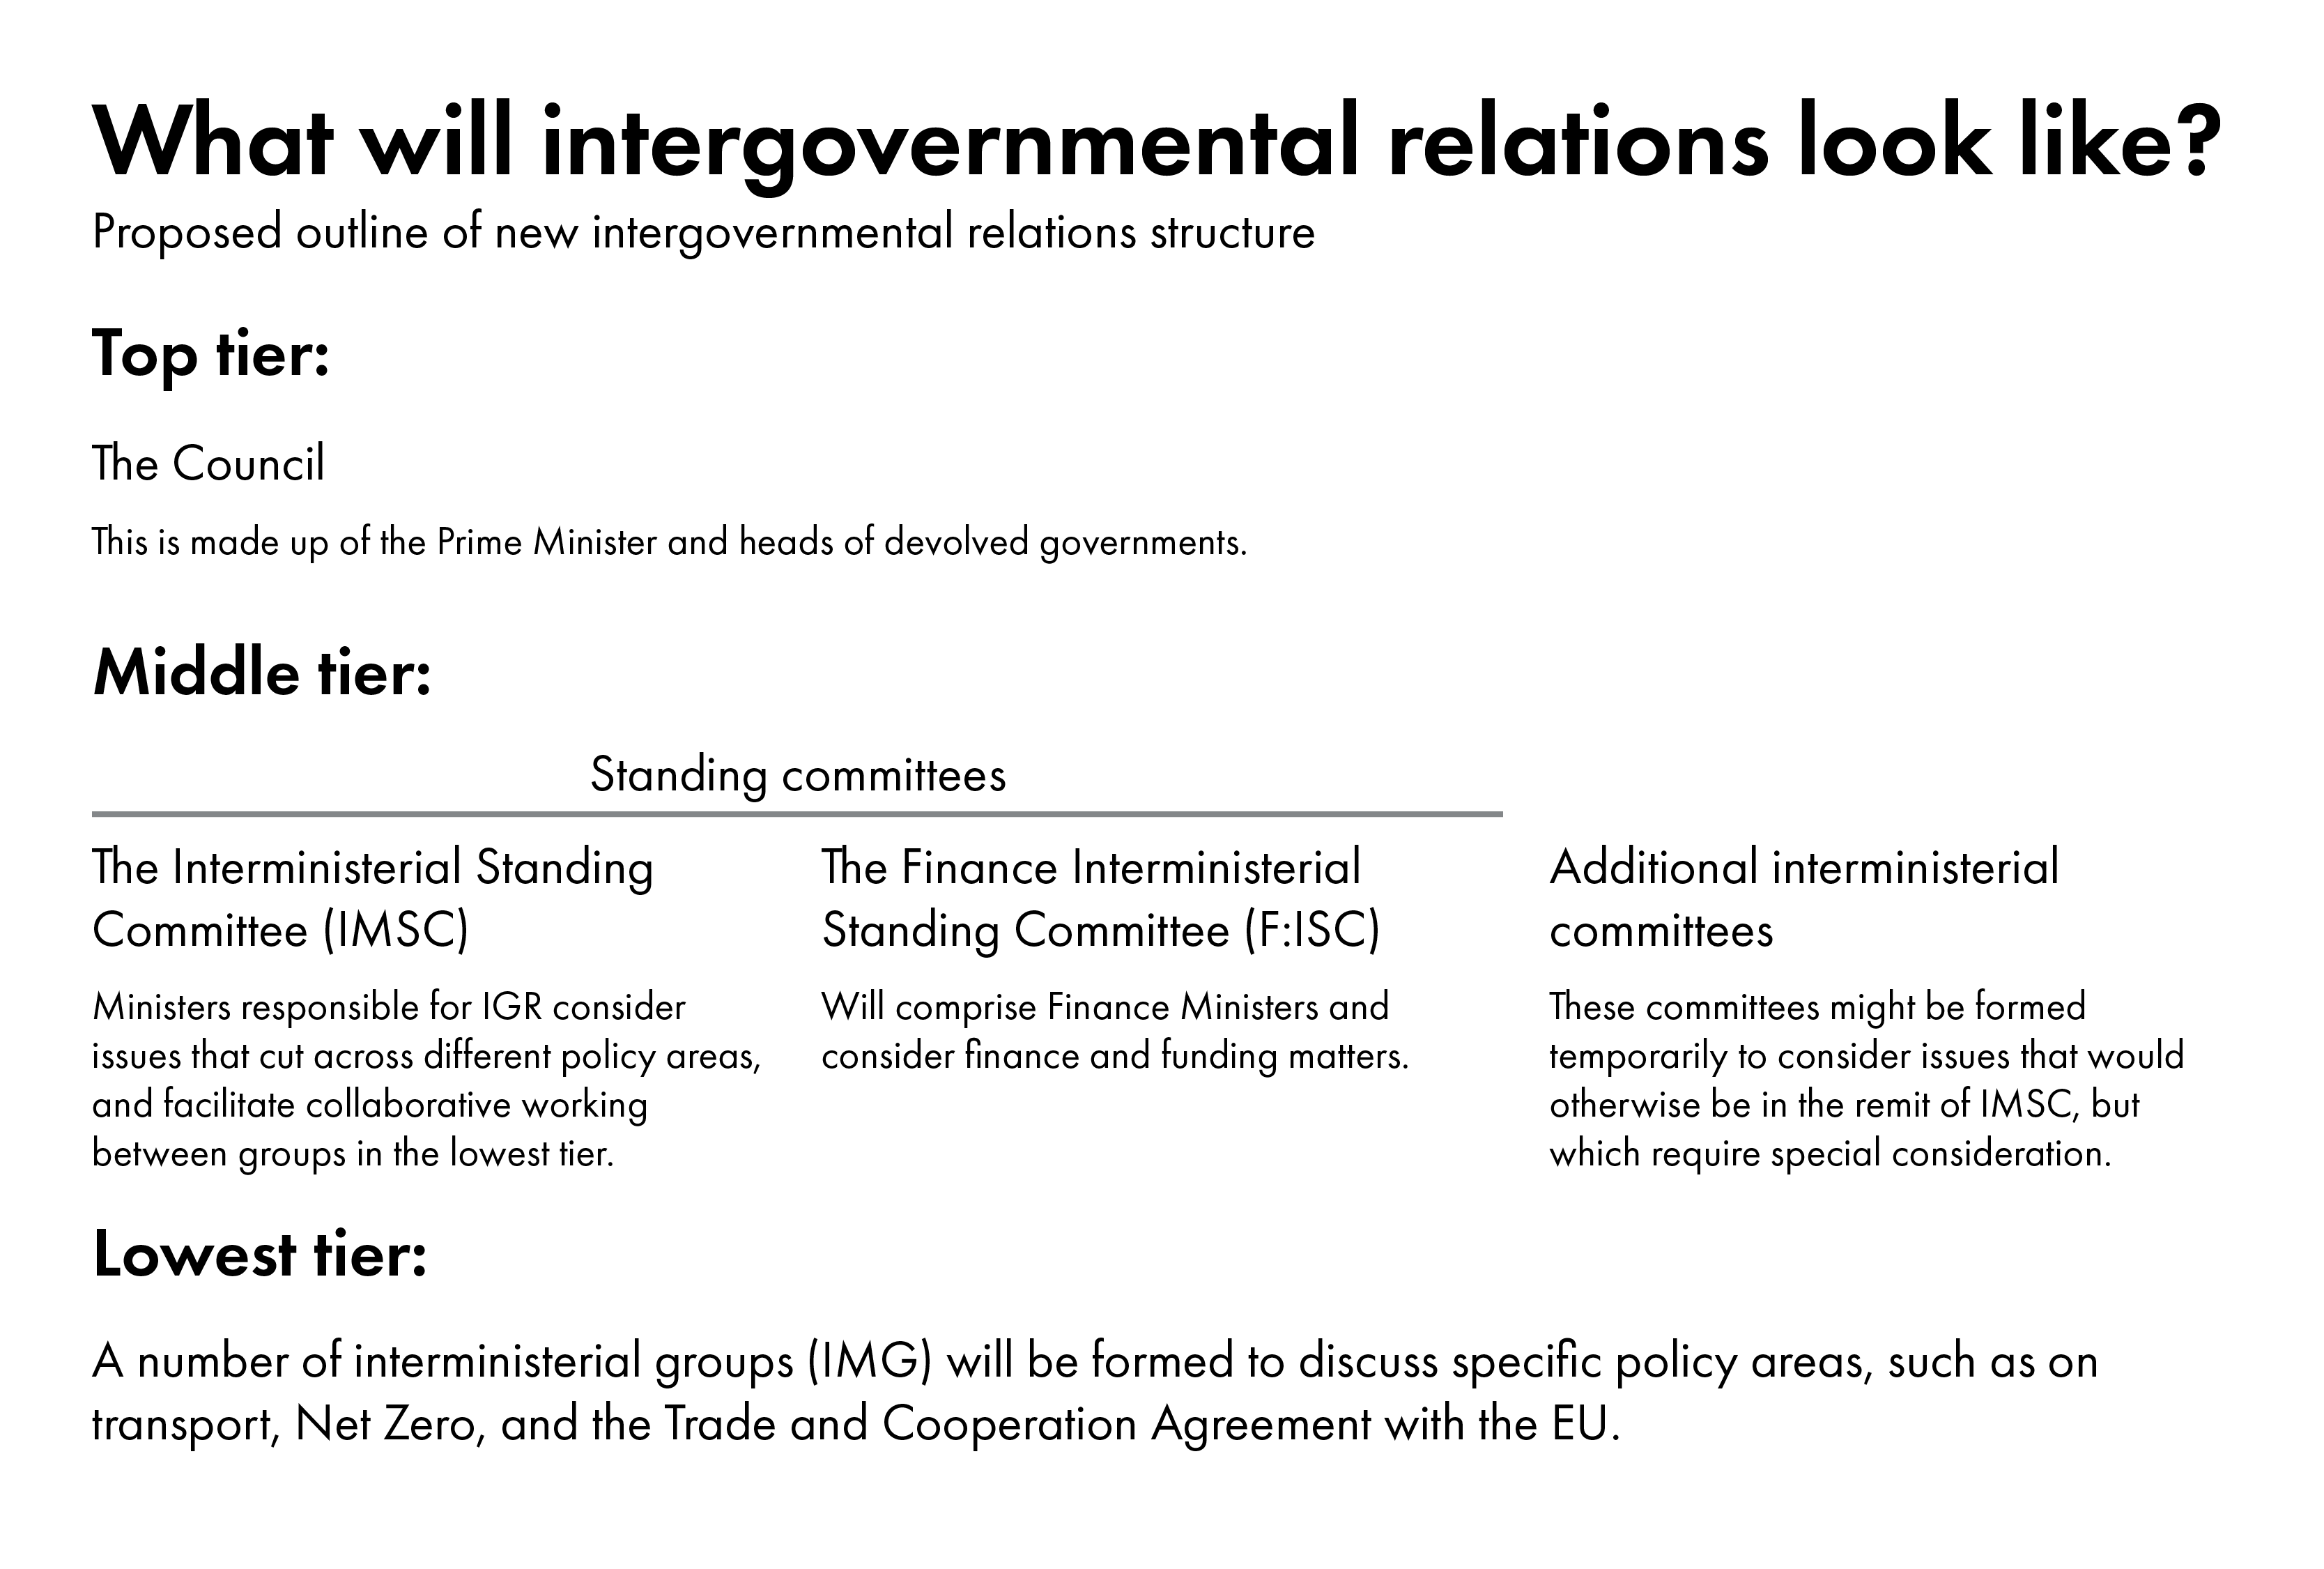 Image showing the proposed structure for intergovernmental relations.